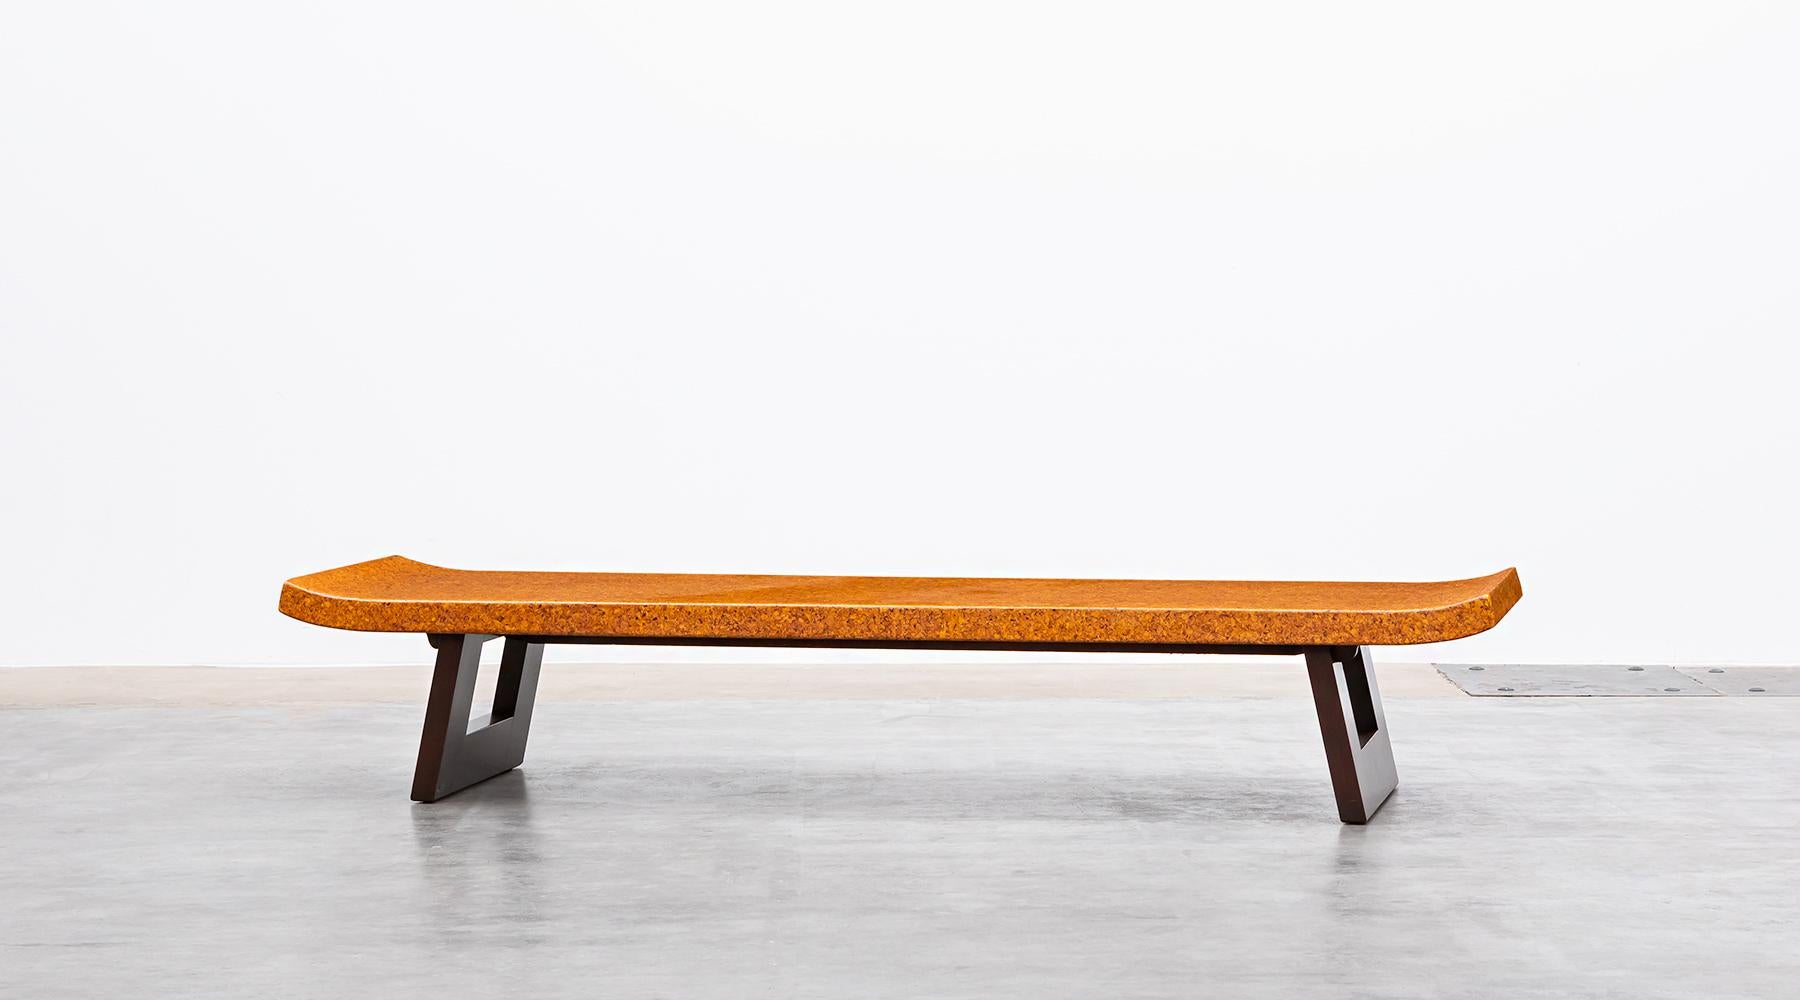 Mahogany, cork, coffee table, bench, Paul Frankl, USA, 1948.

Coffee table from the middle of the century, designed by Paul Frankl. Eloquently shaped cork tabletop, on two wooden mahogany legs, each created in a rectangle. It can be used as a